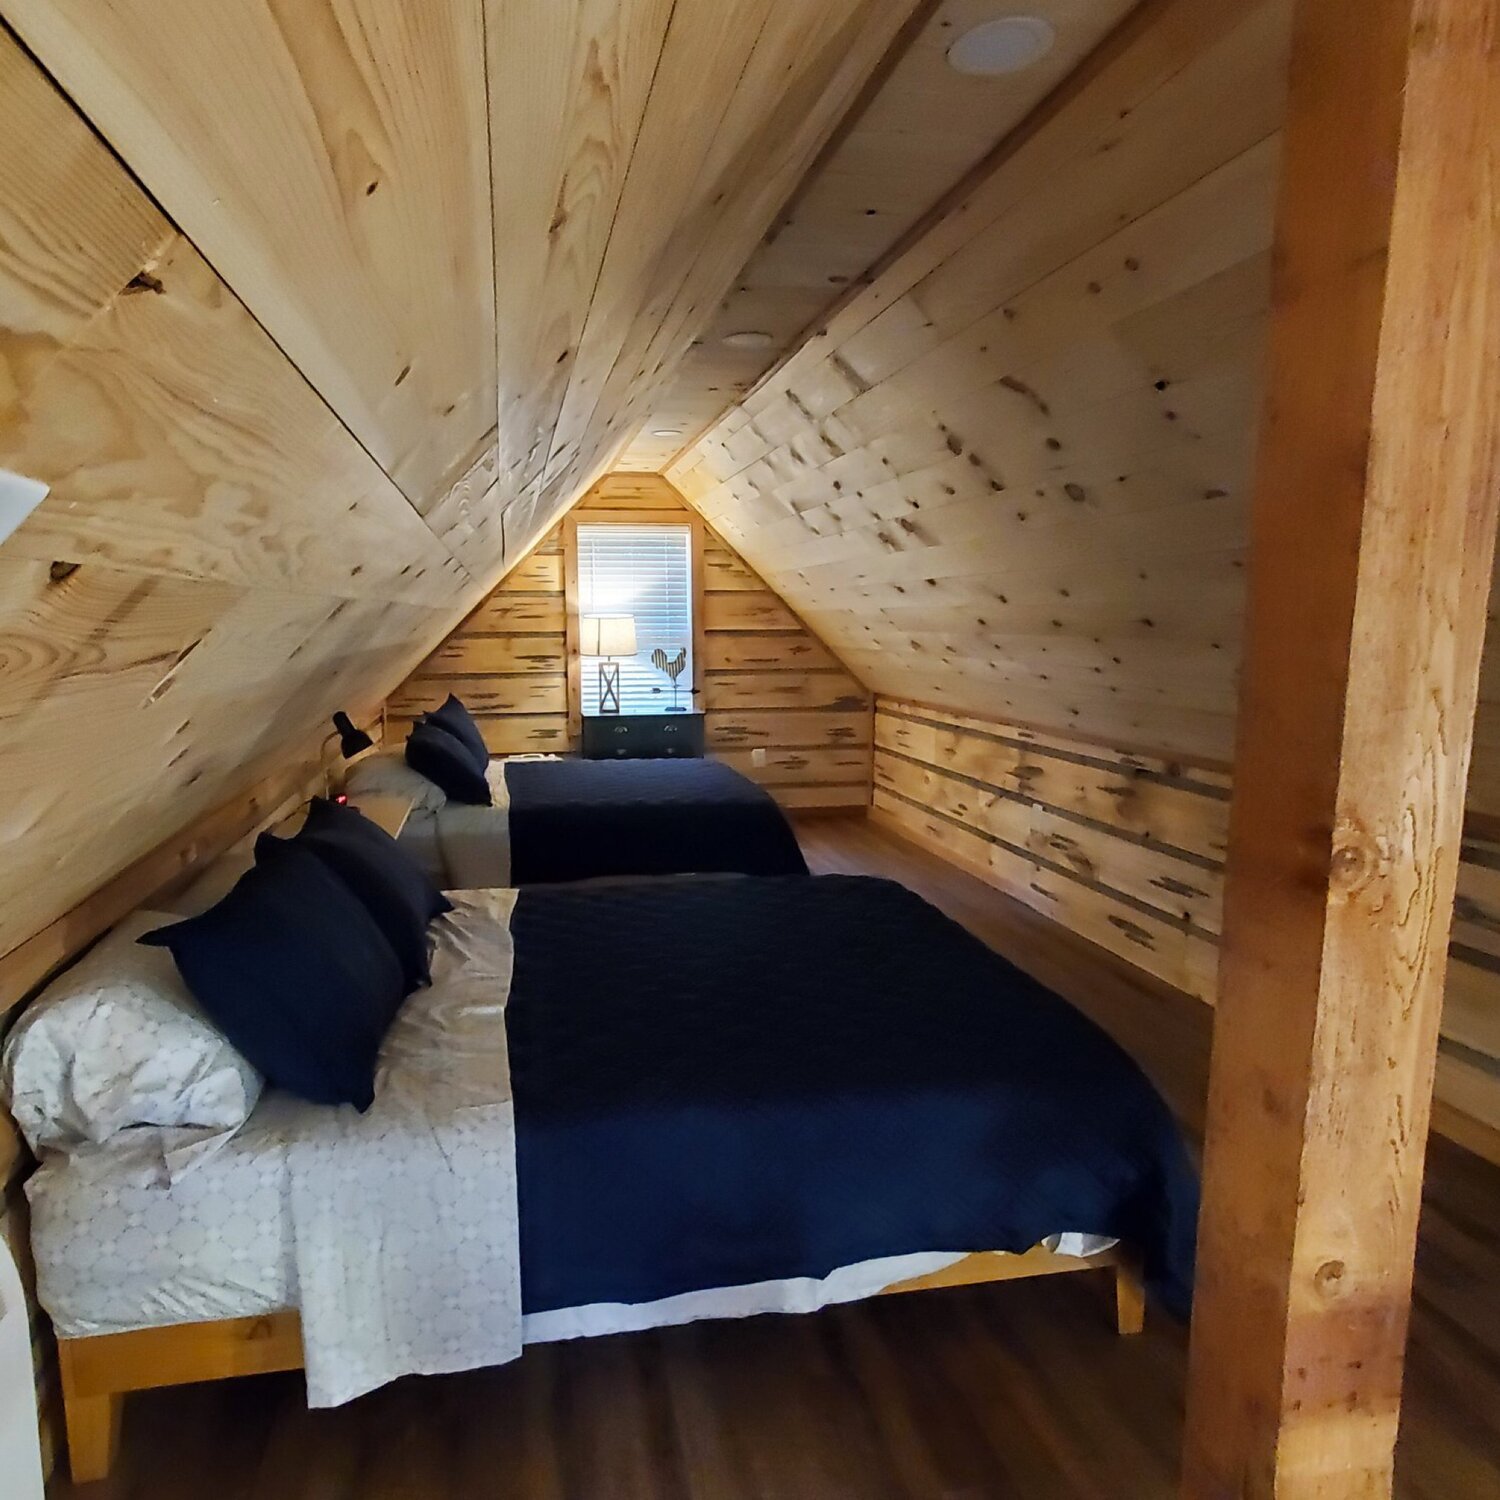  Diane and Eric did an amazing job making the cabins cozy and inviting. We especially love how each of the bedrooms is full of character and individuality - they let those knots shine!  